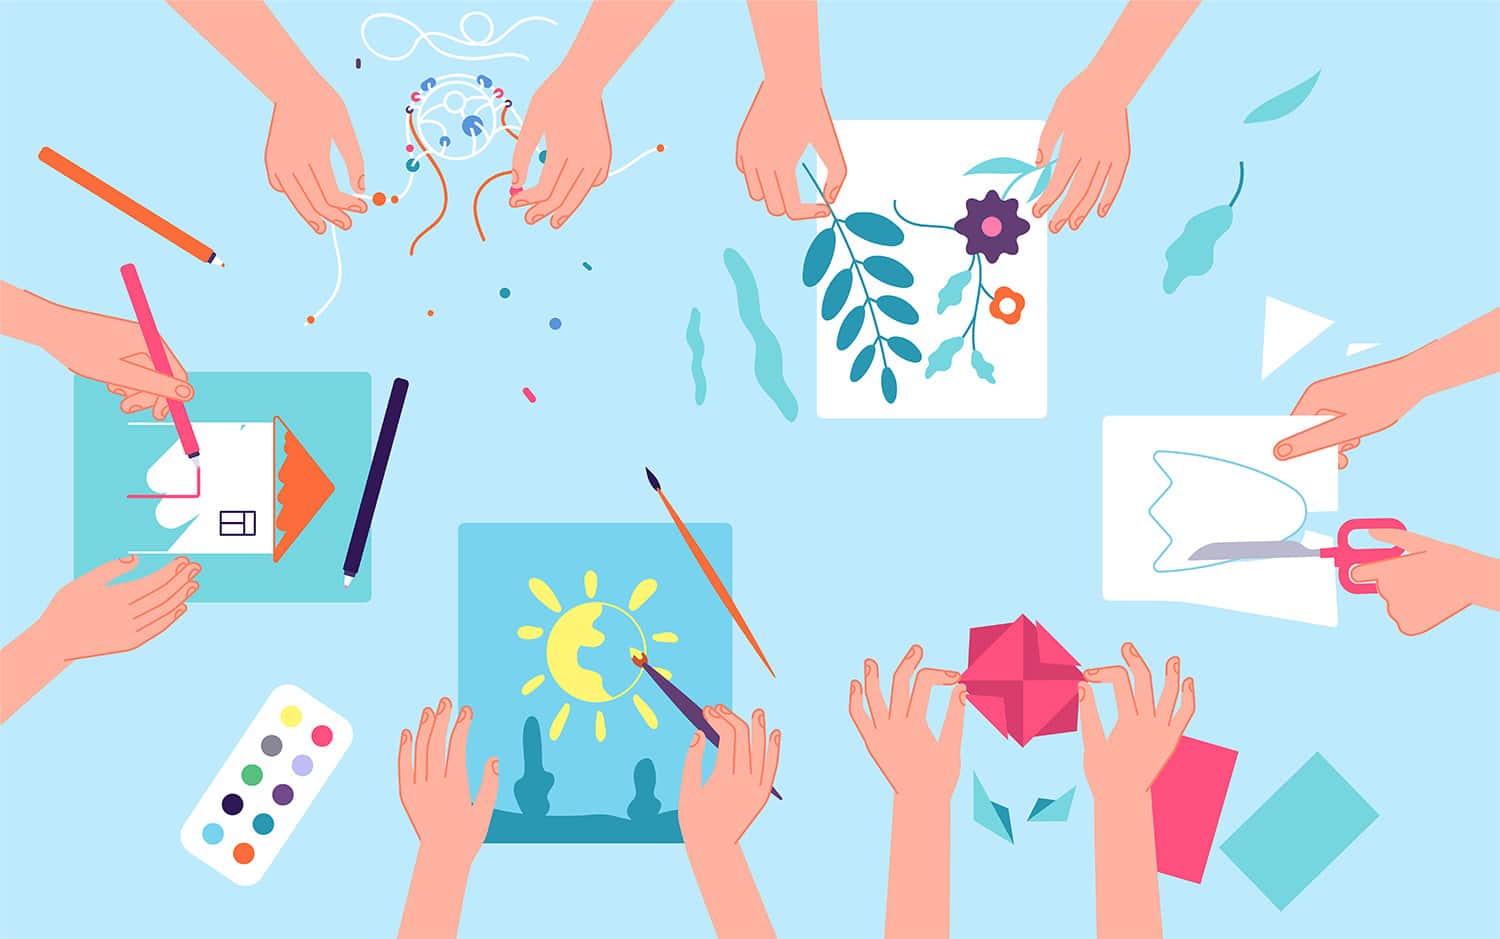 2D graphic of hands doing arts and crafts projects together 